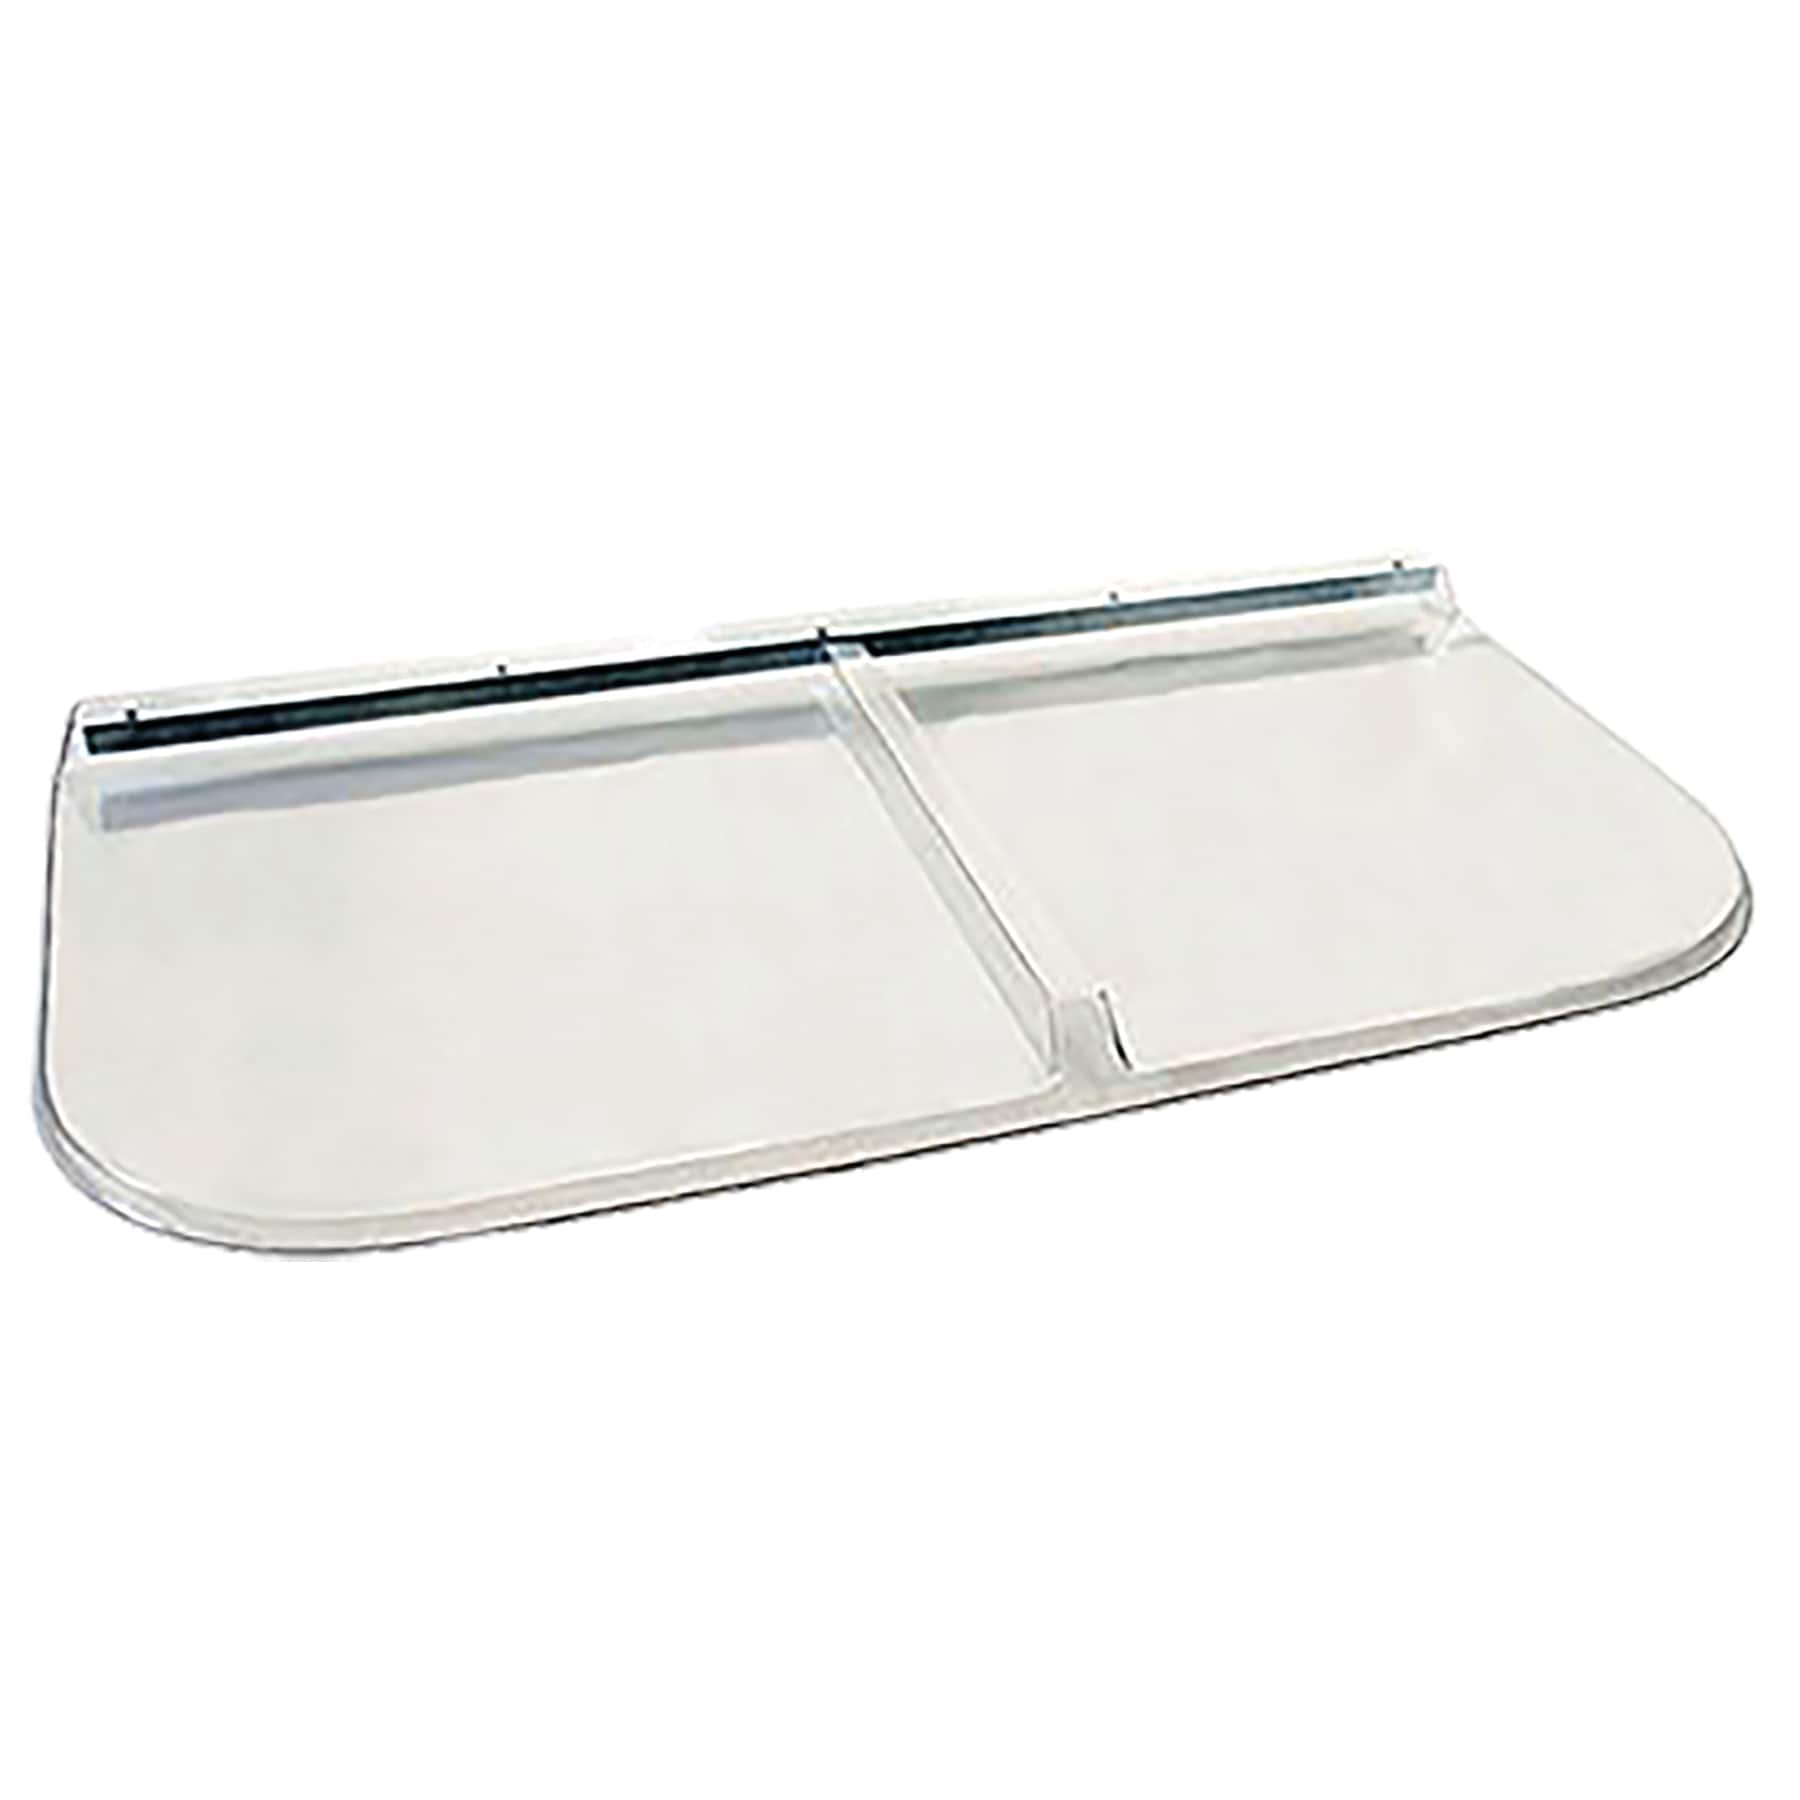 SHAPE PRODUCTS 52-in W x 26-in D x 2-1/2-in H Premium Square Flat Window  Well Cover - Clear, Plastic, Hardware Included in the Window Well Covers  department at